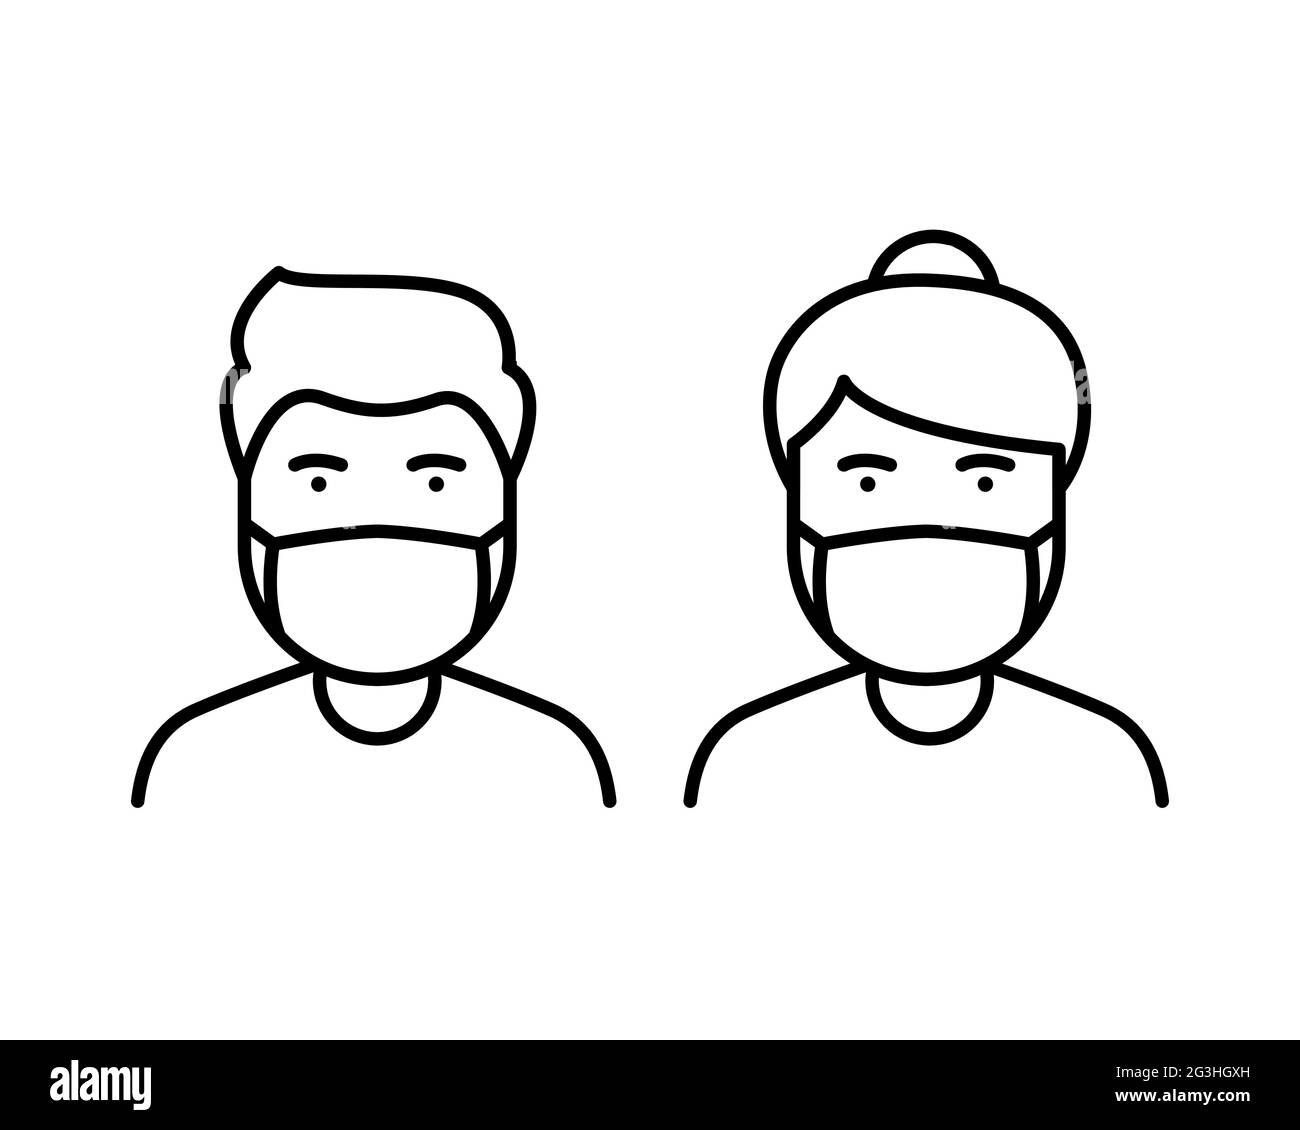 Wear a mask cartoon Black and White Stock Photos & Images - Alamy